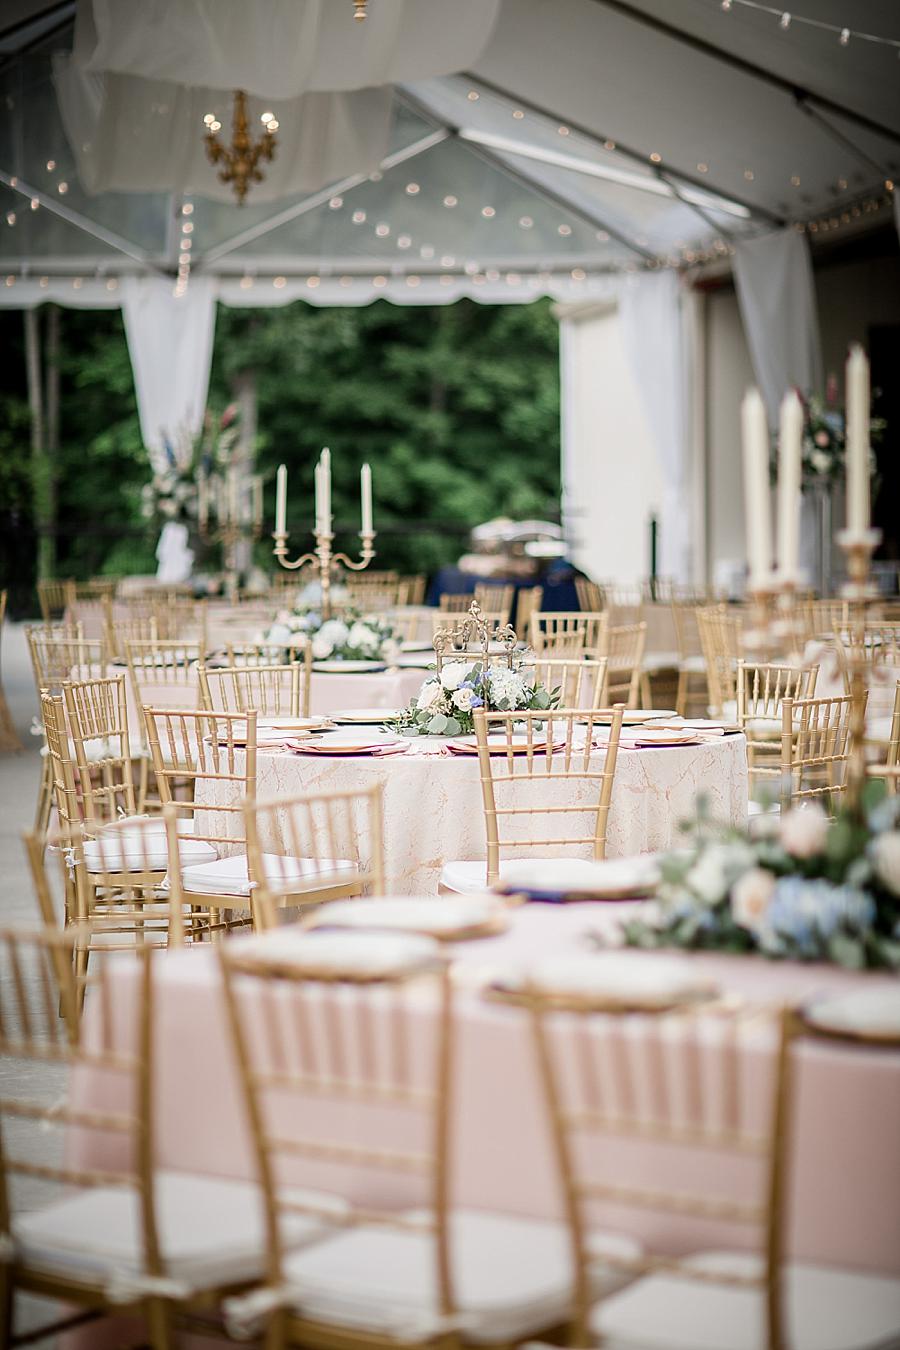 Reception tables at this Castleton Farms Wedding by Knoxville Wedding Photographer, Amanda May Photos.